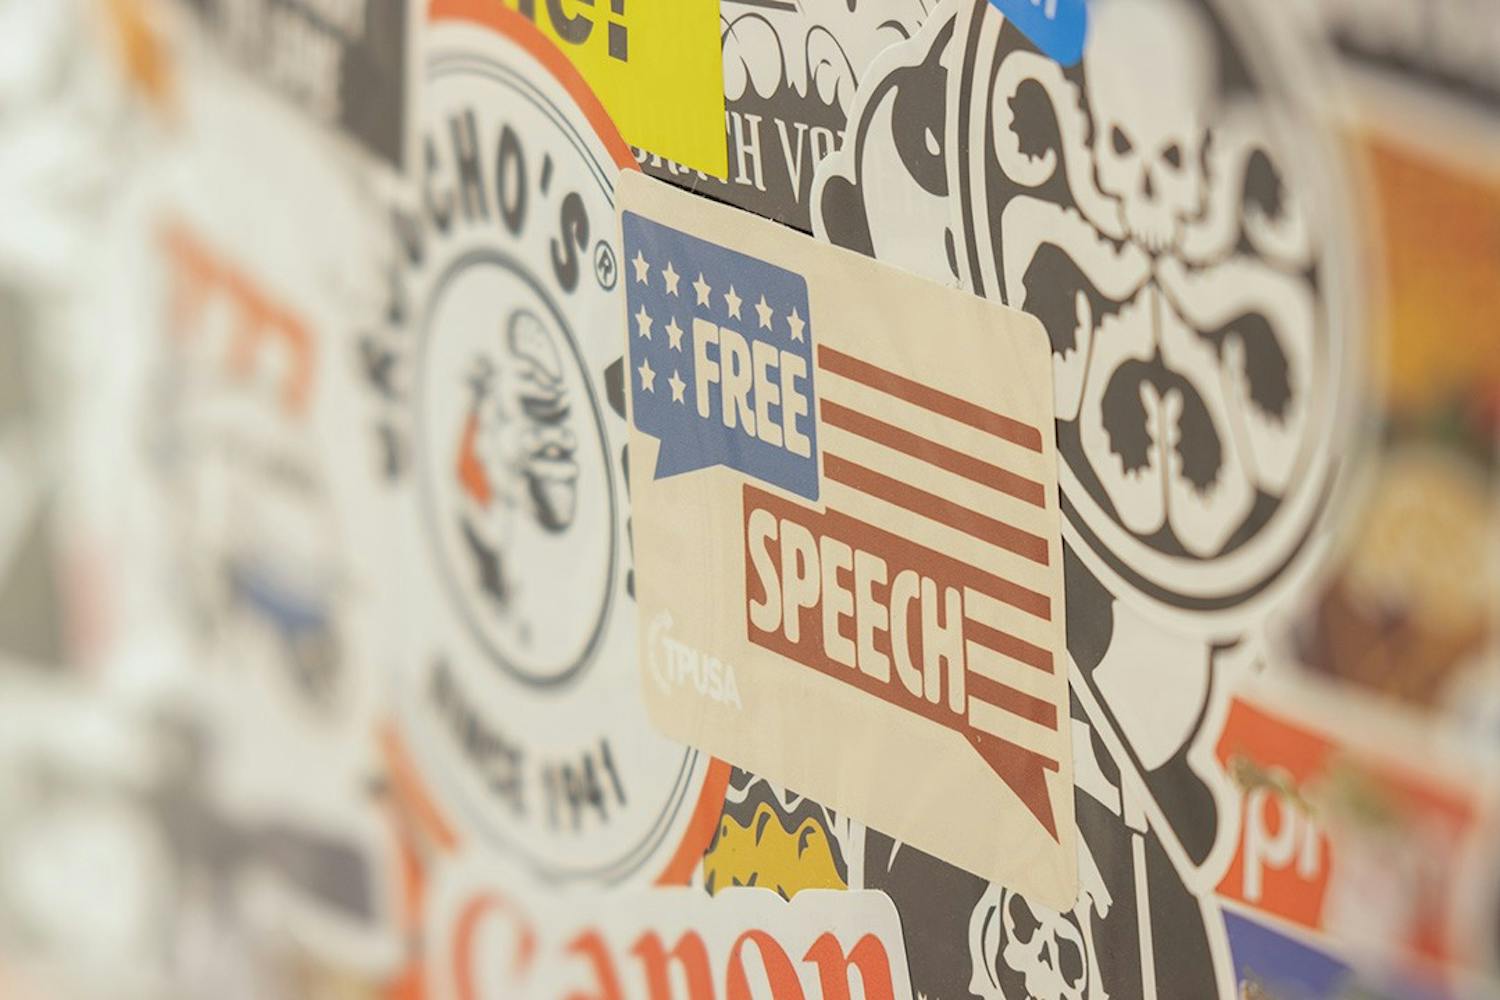 A Turning Point USA "Free Speech" sticker on the top layer of a sticker bomb.